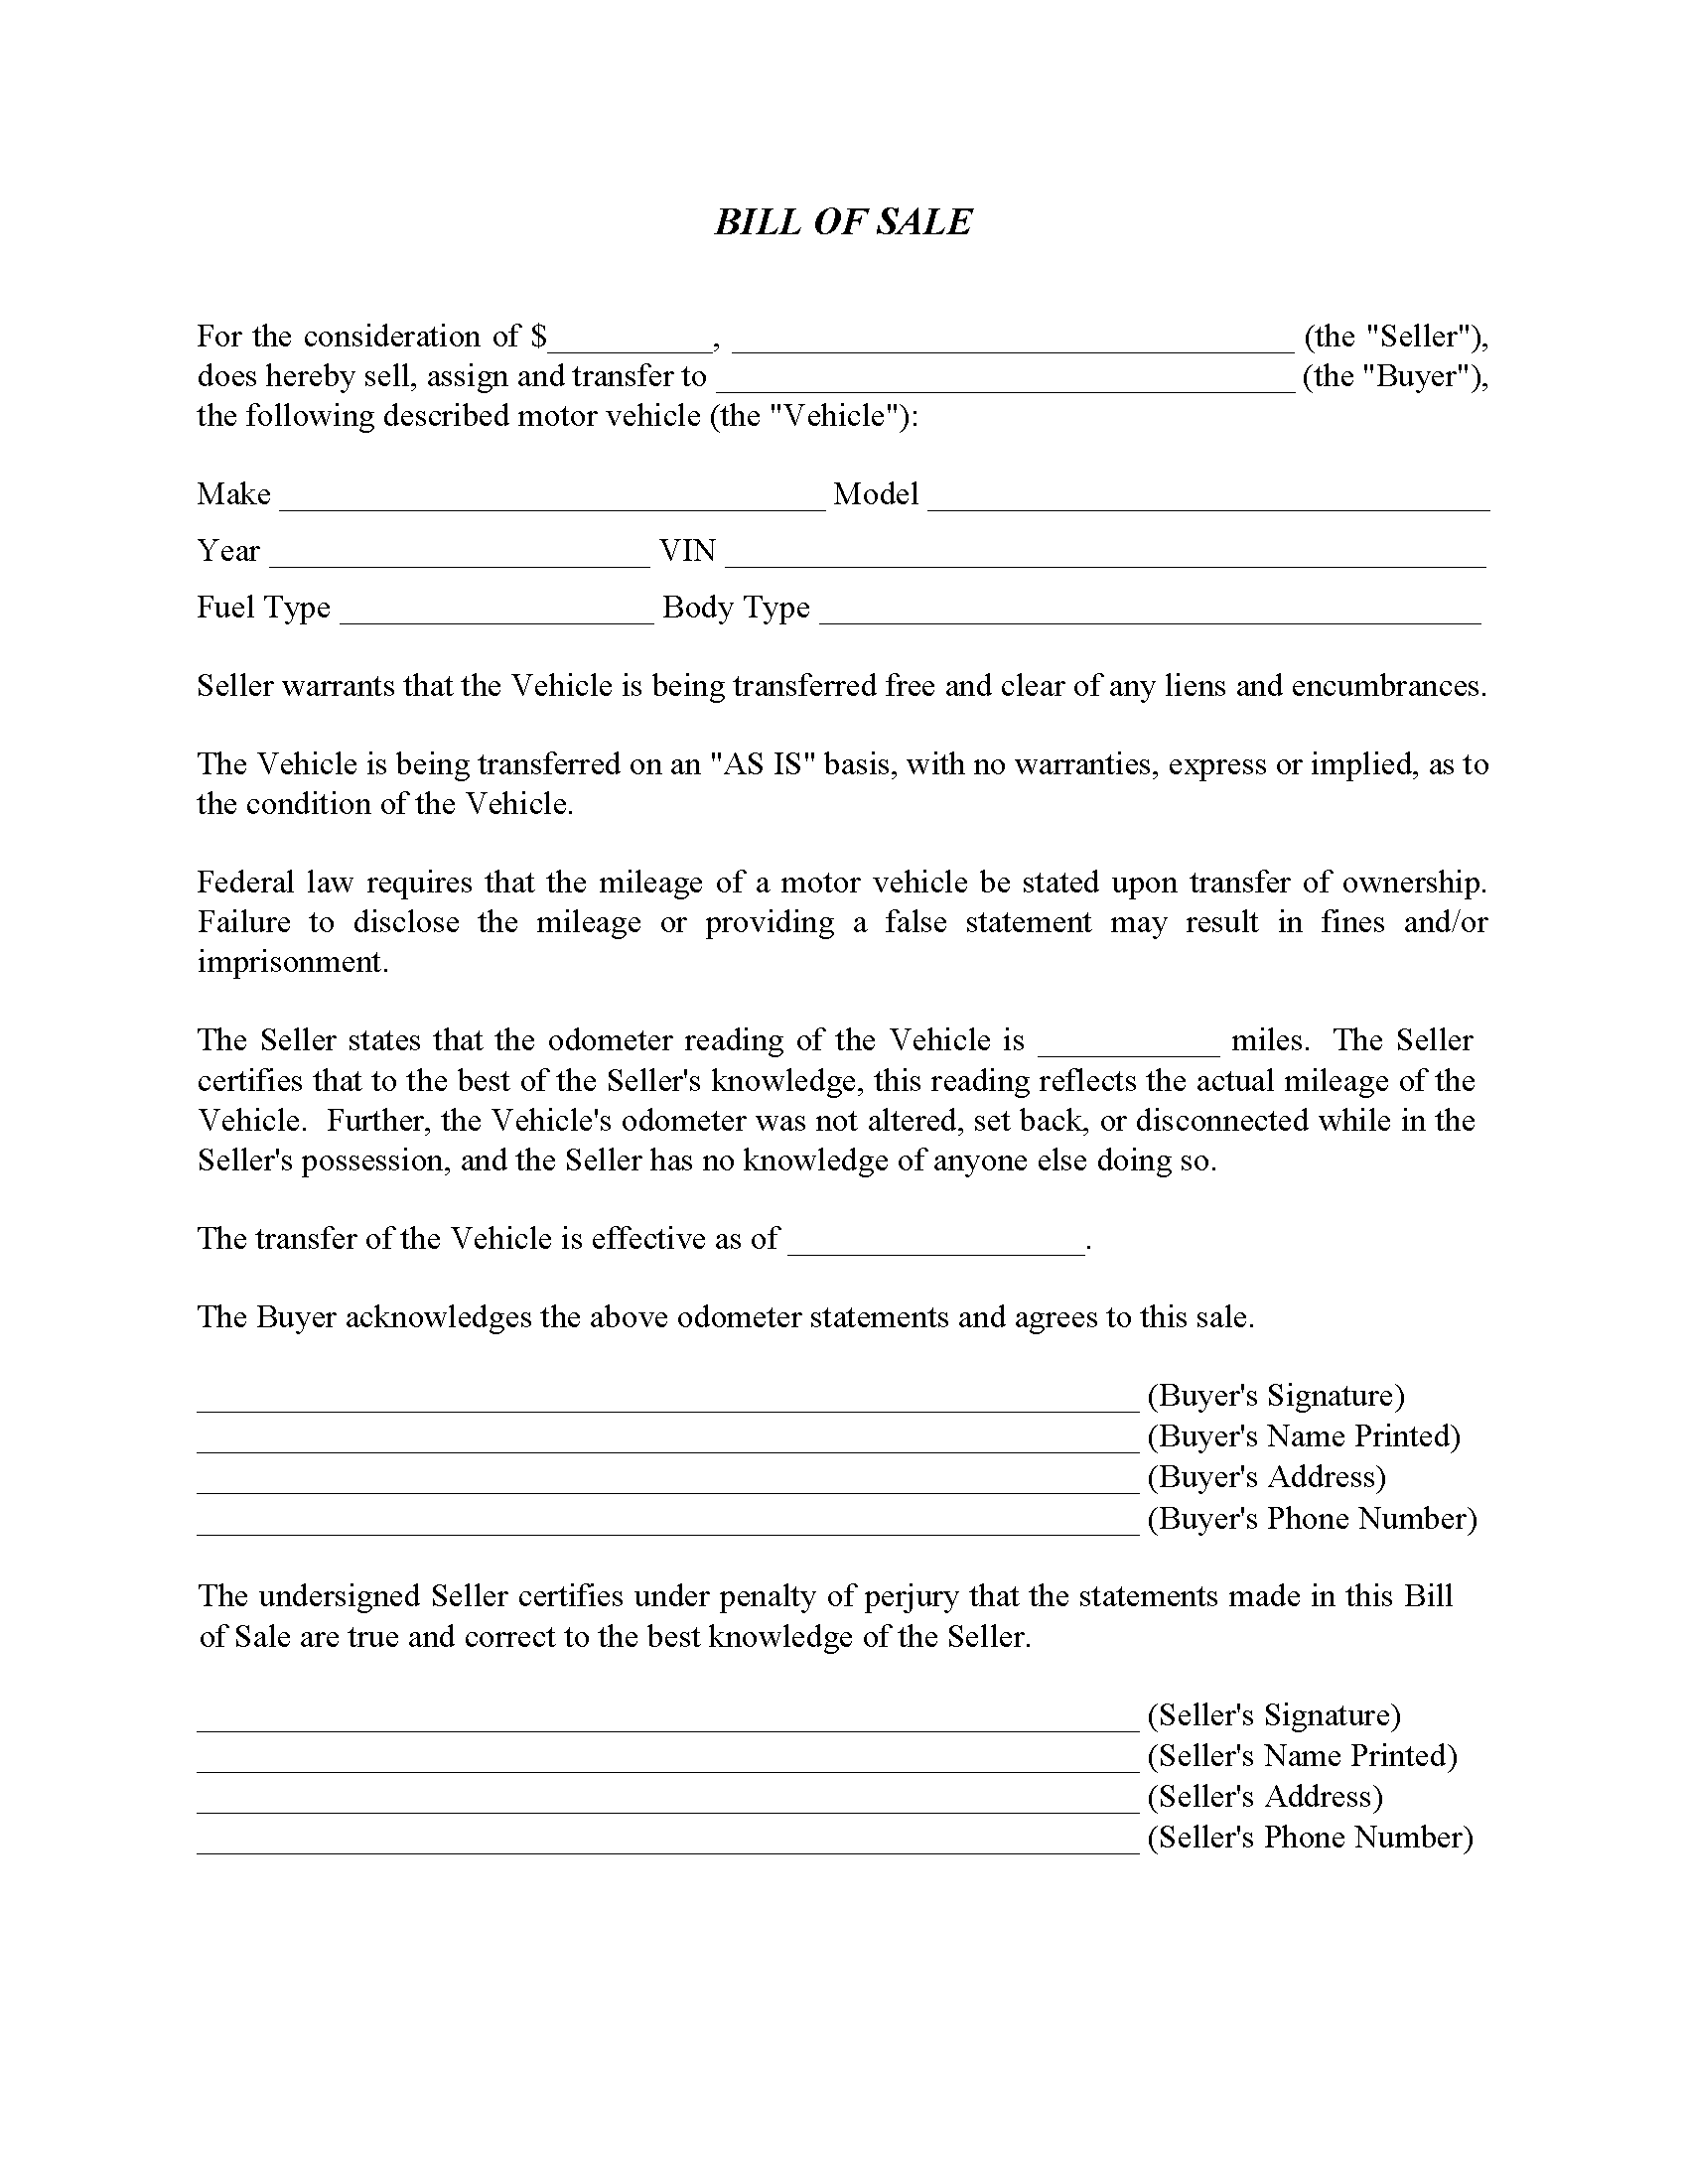 South Carolina Motor Vehicle Bill of Sale Form - Word - Free Pertaining To legal bill of sale template